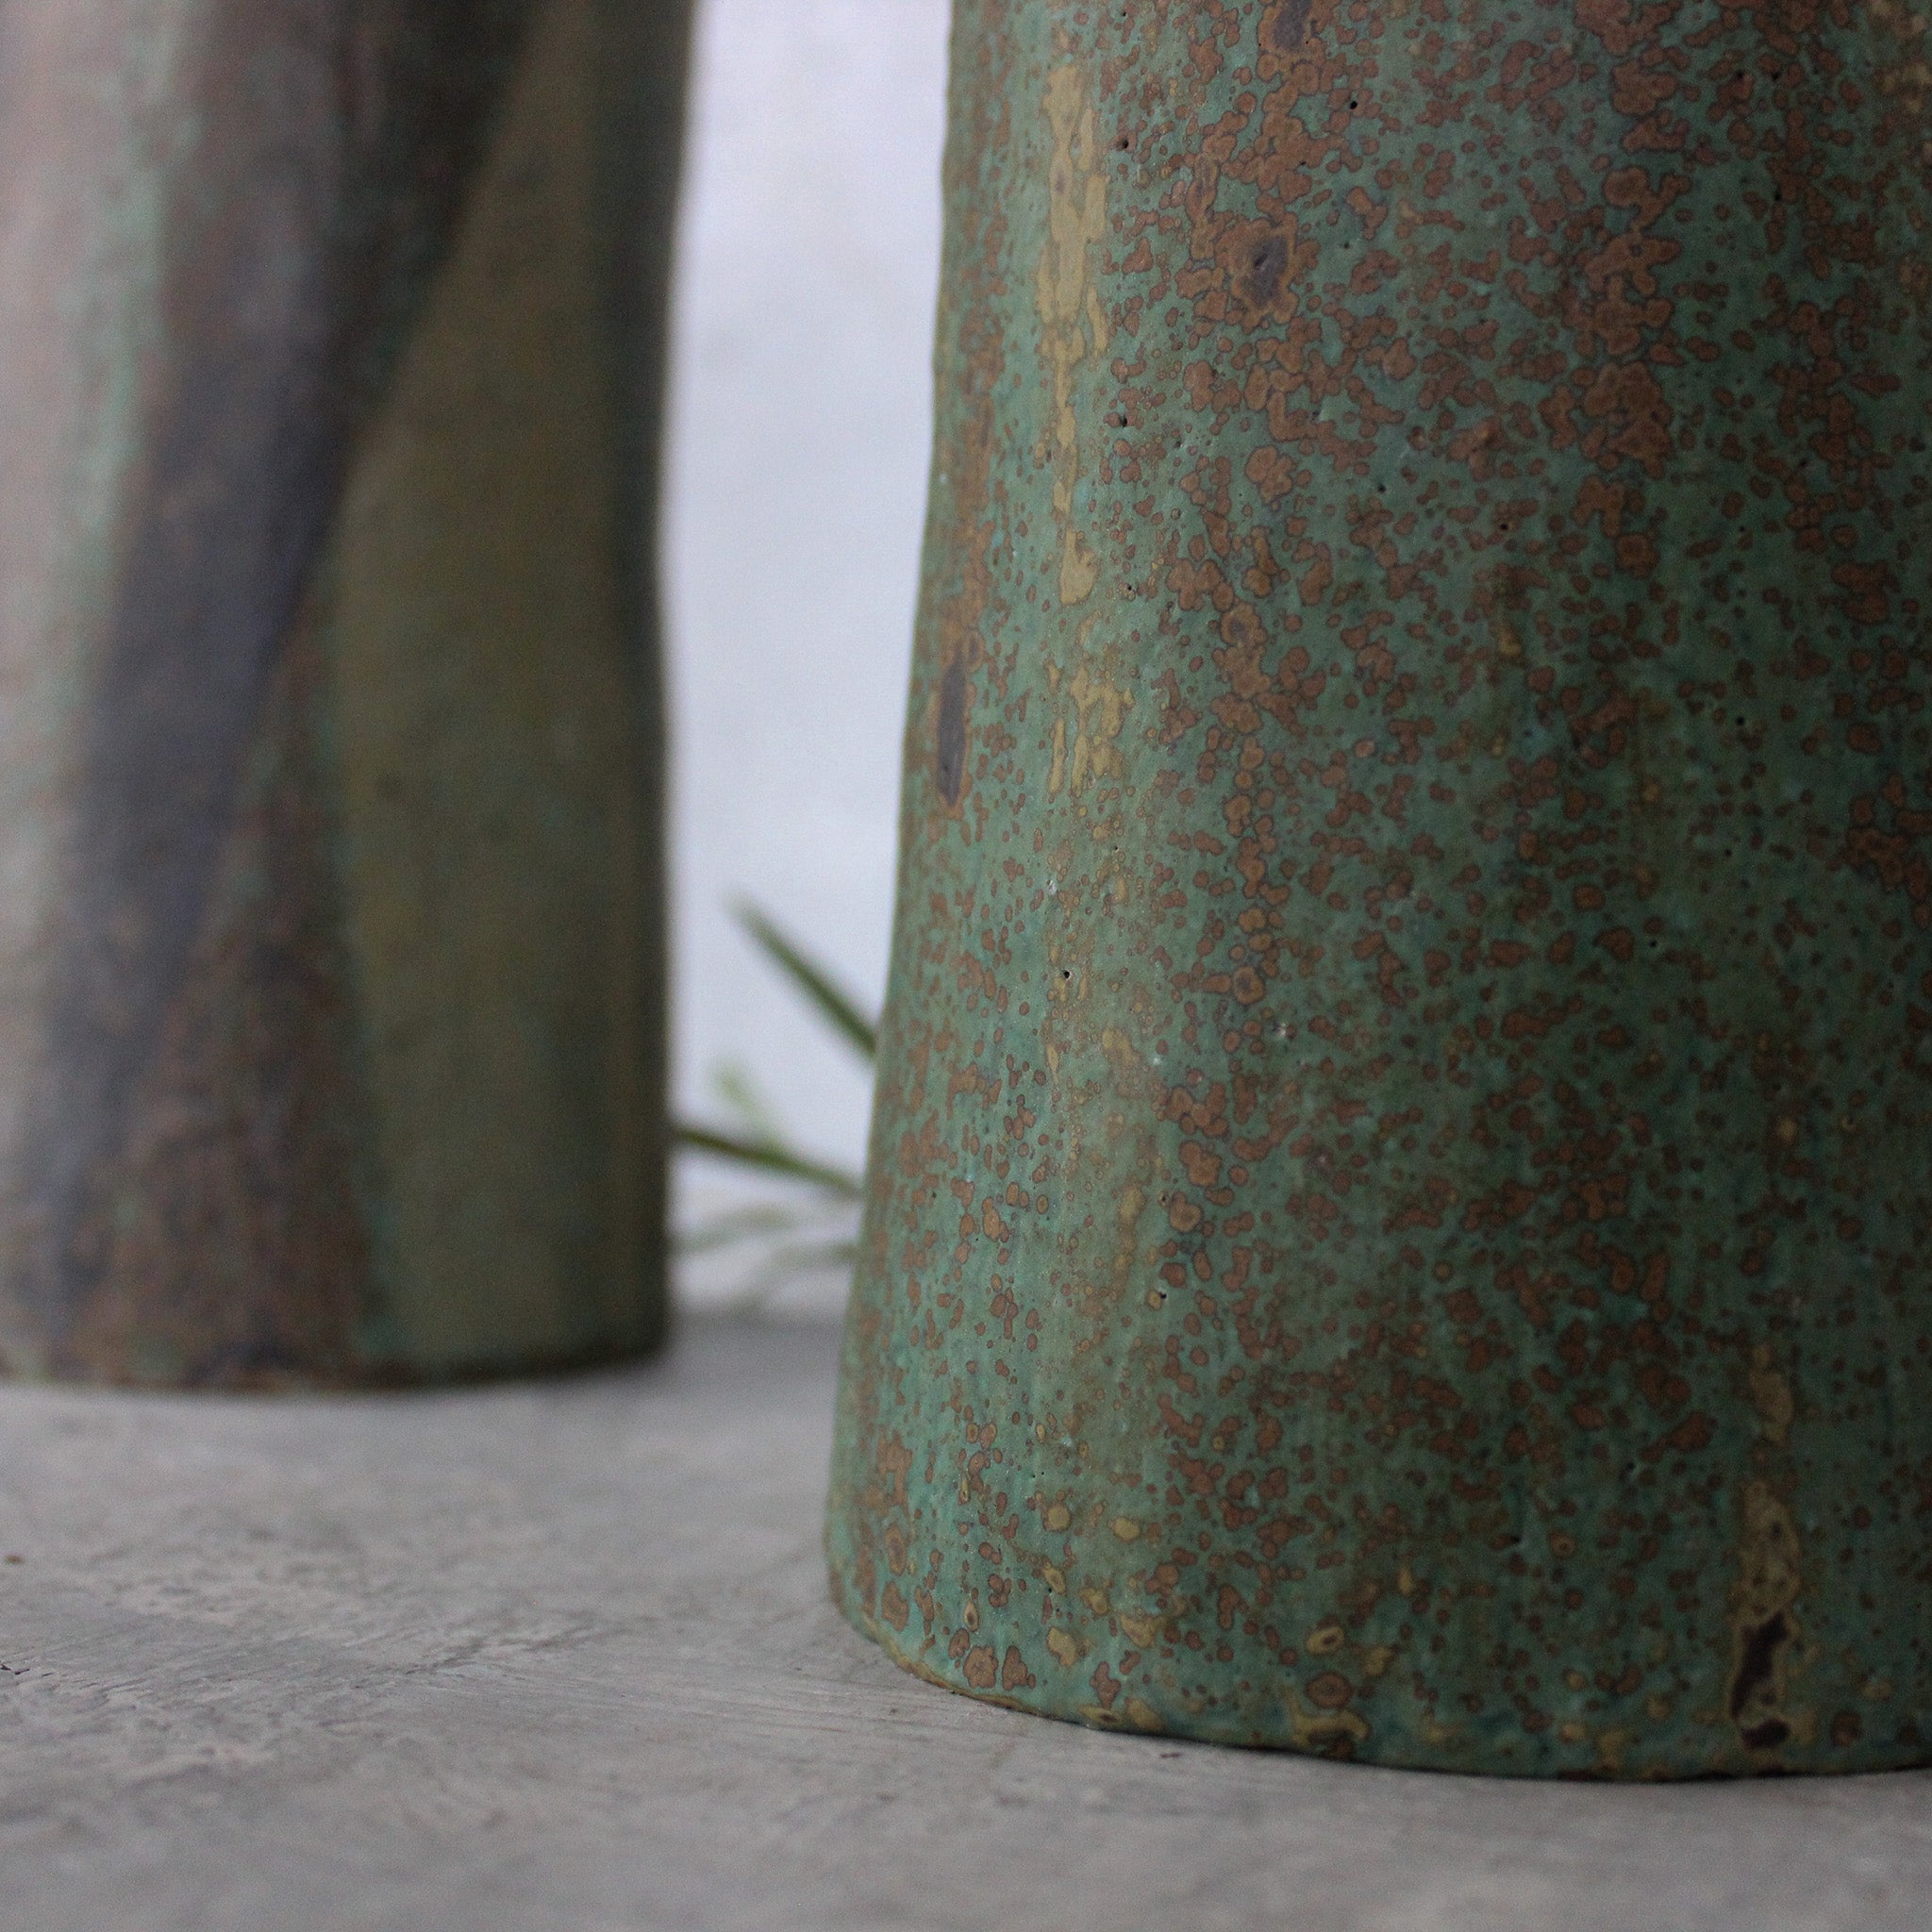 Tree Trunk Vases - Tribe Castlemaine